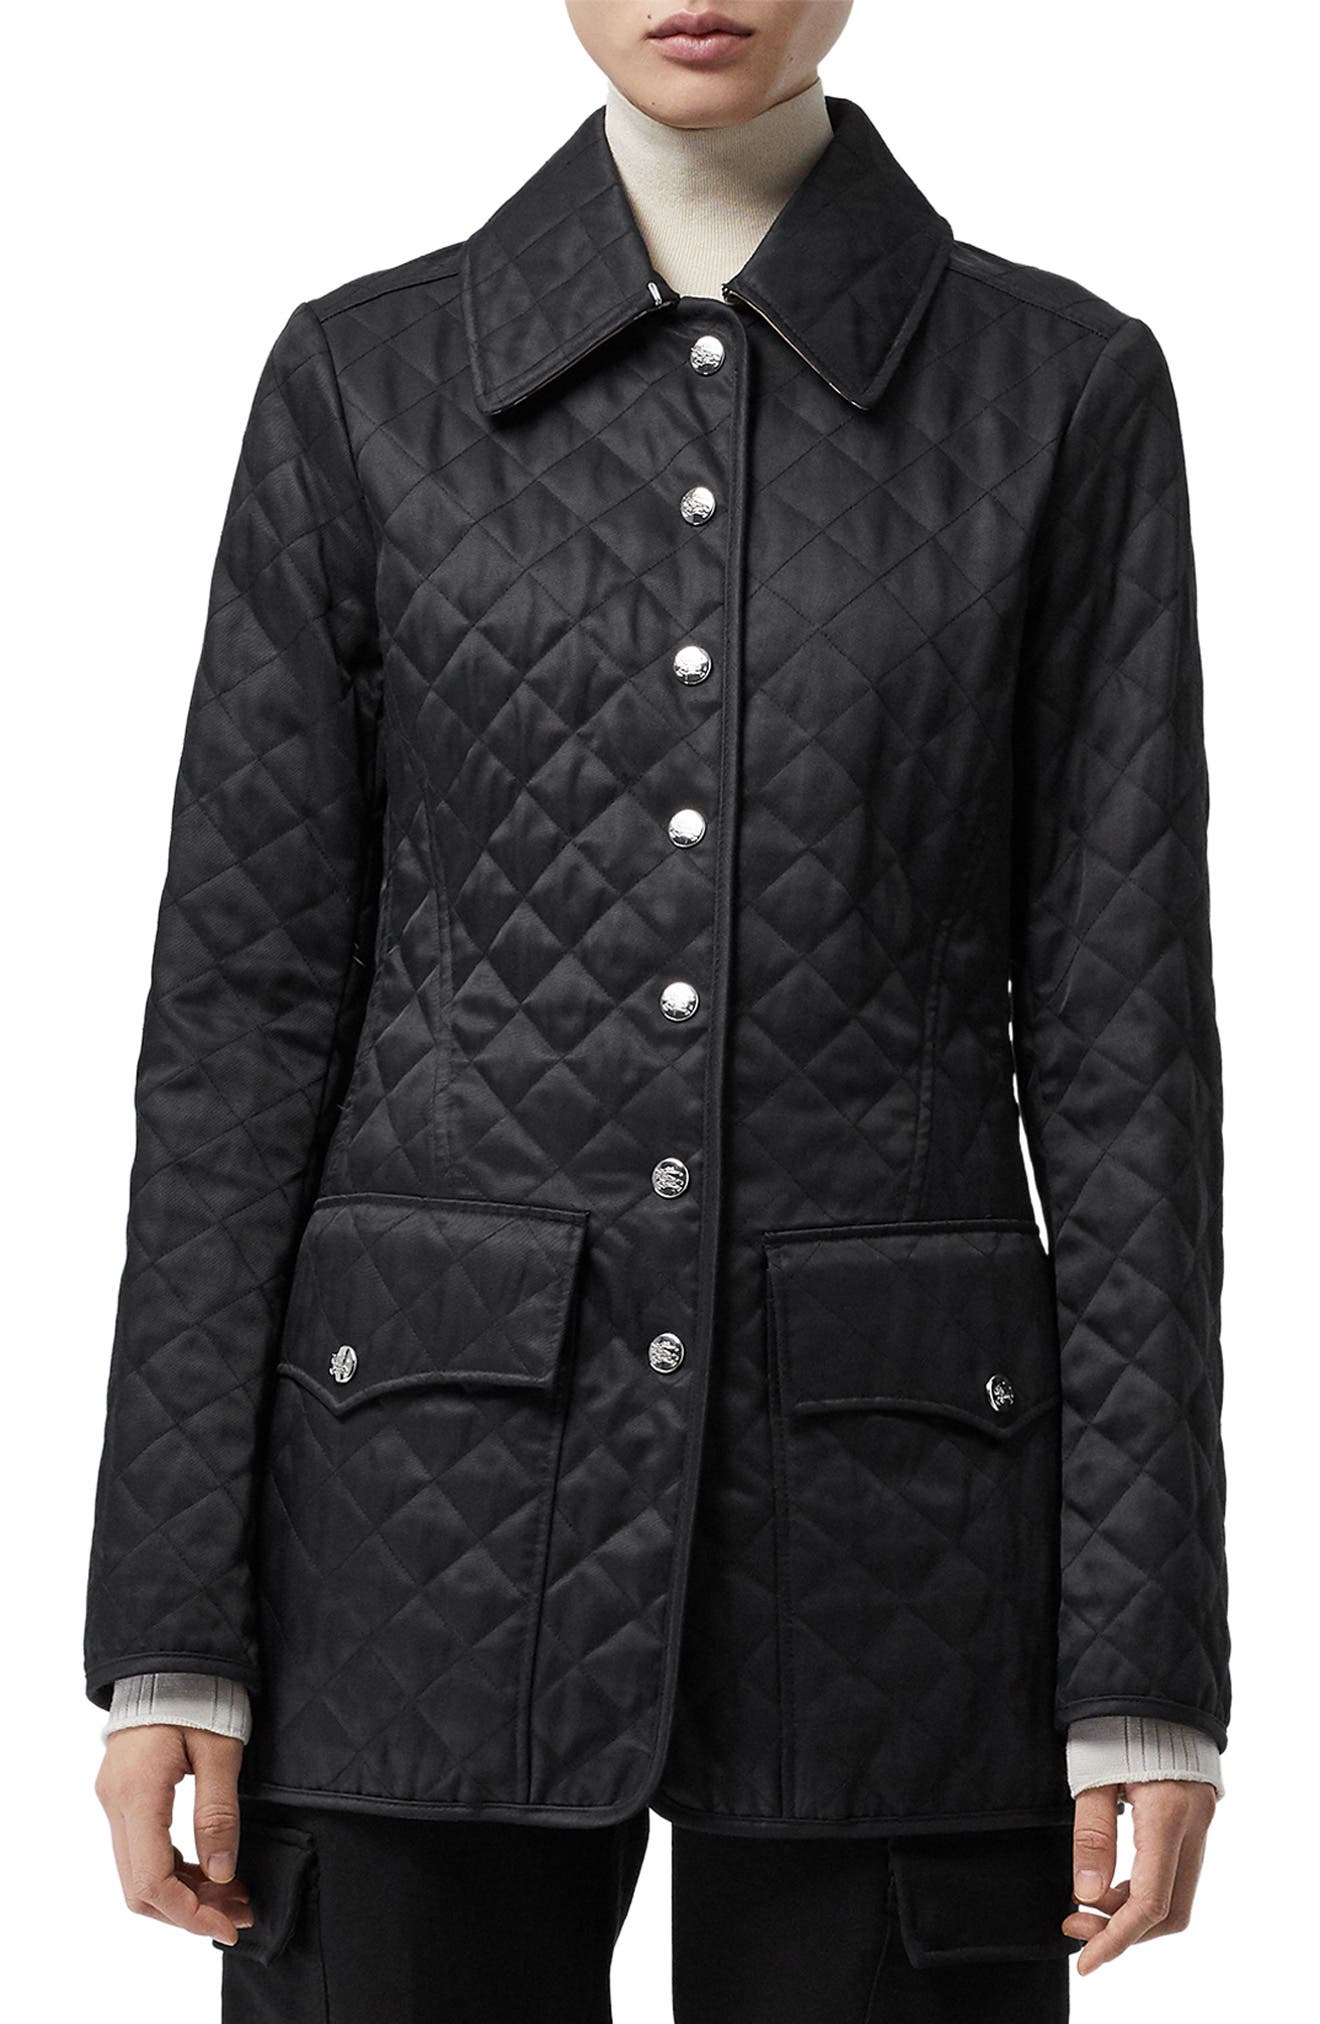 Burberry Borthwicke Quilted Jacket 